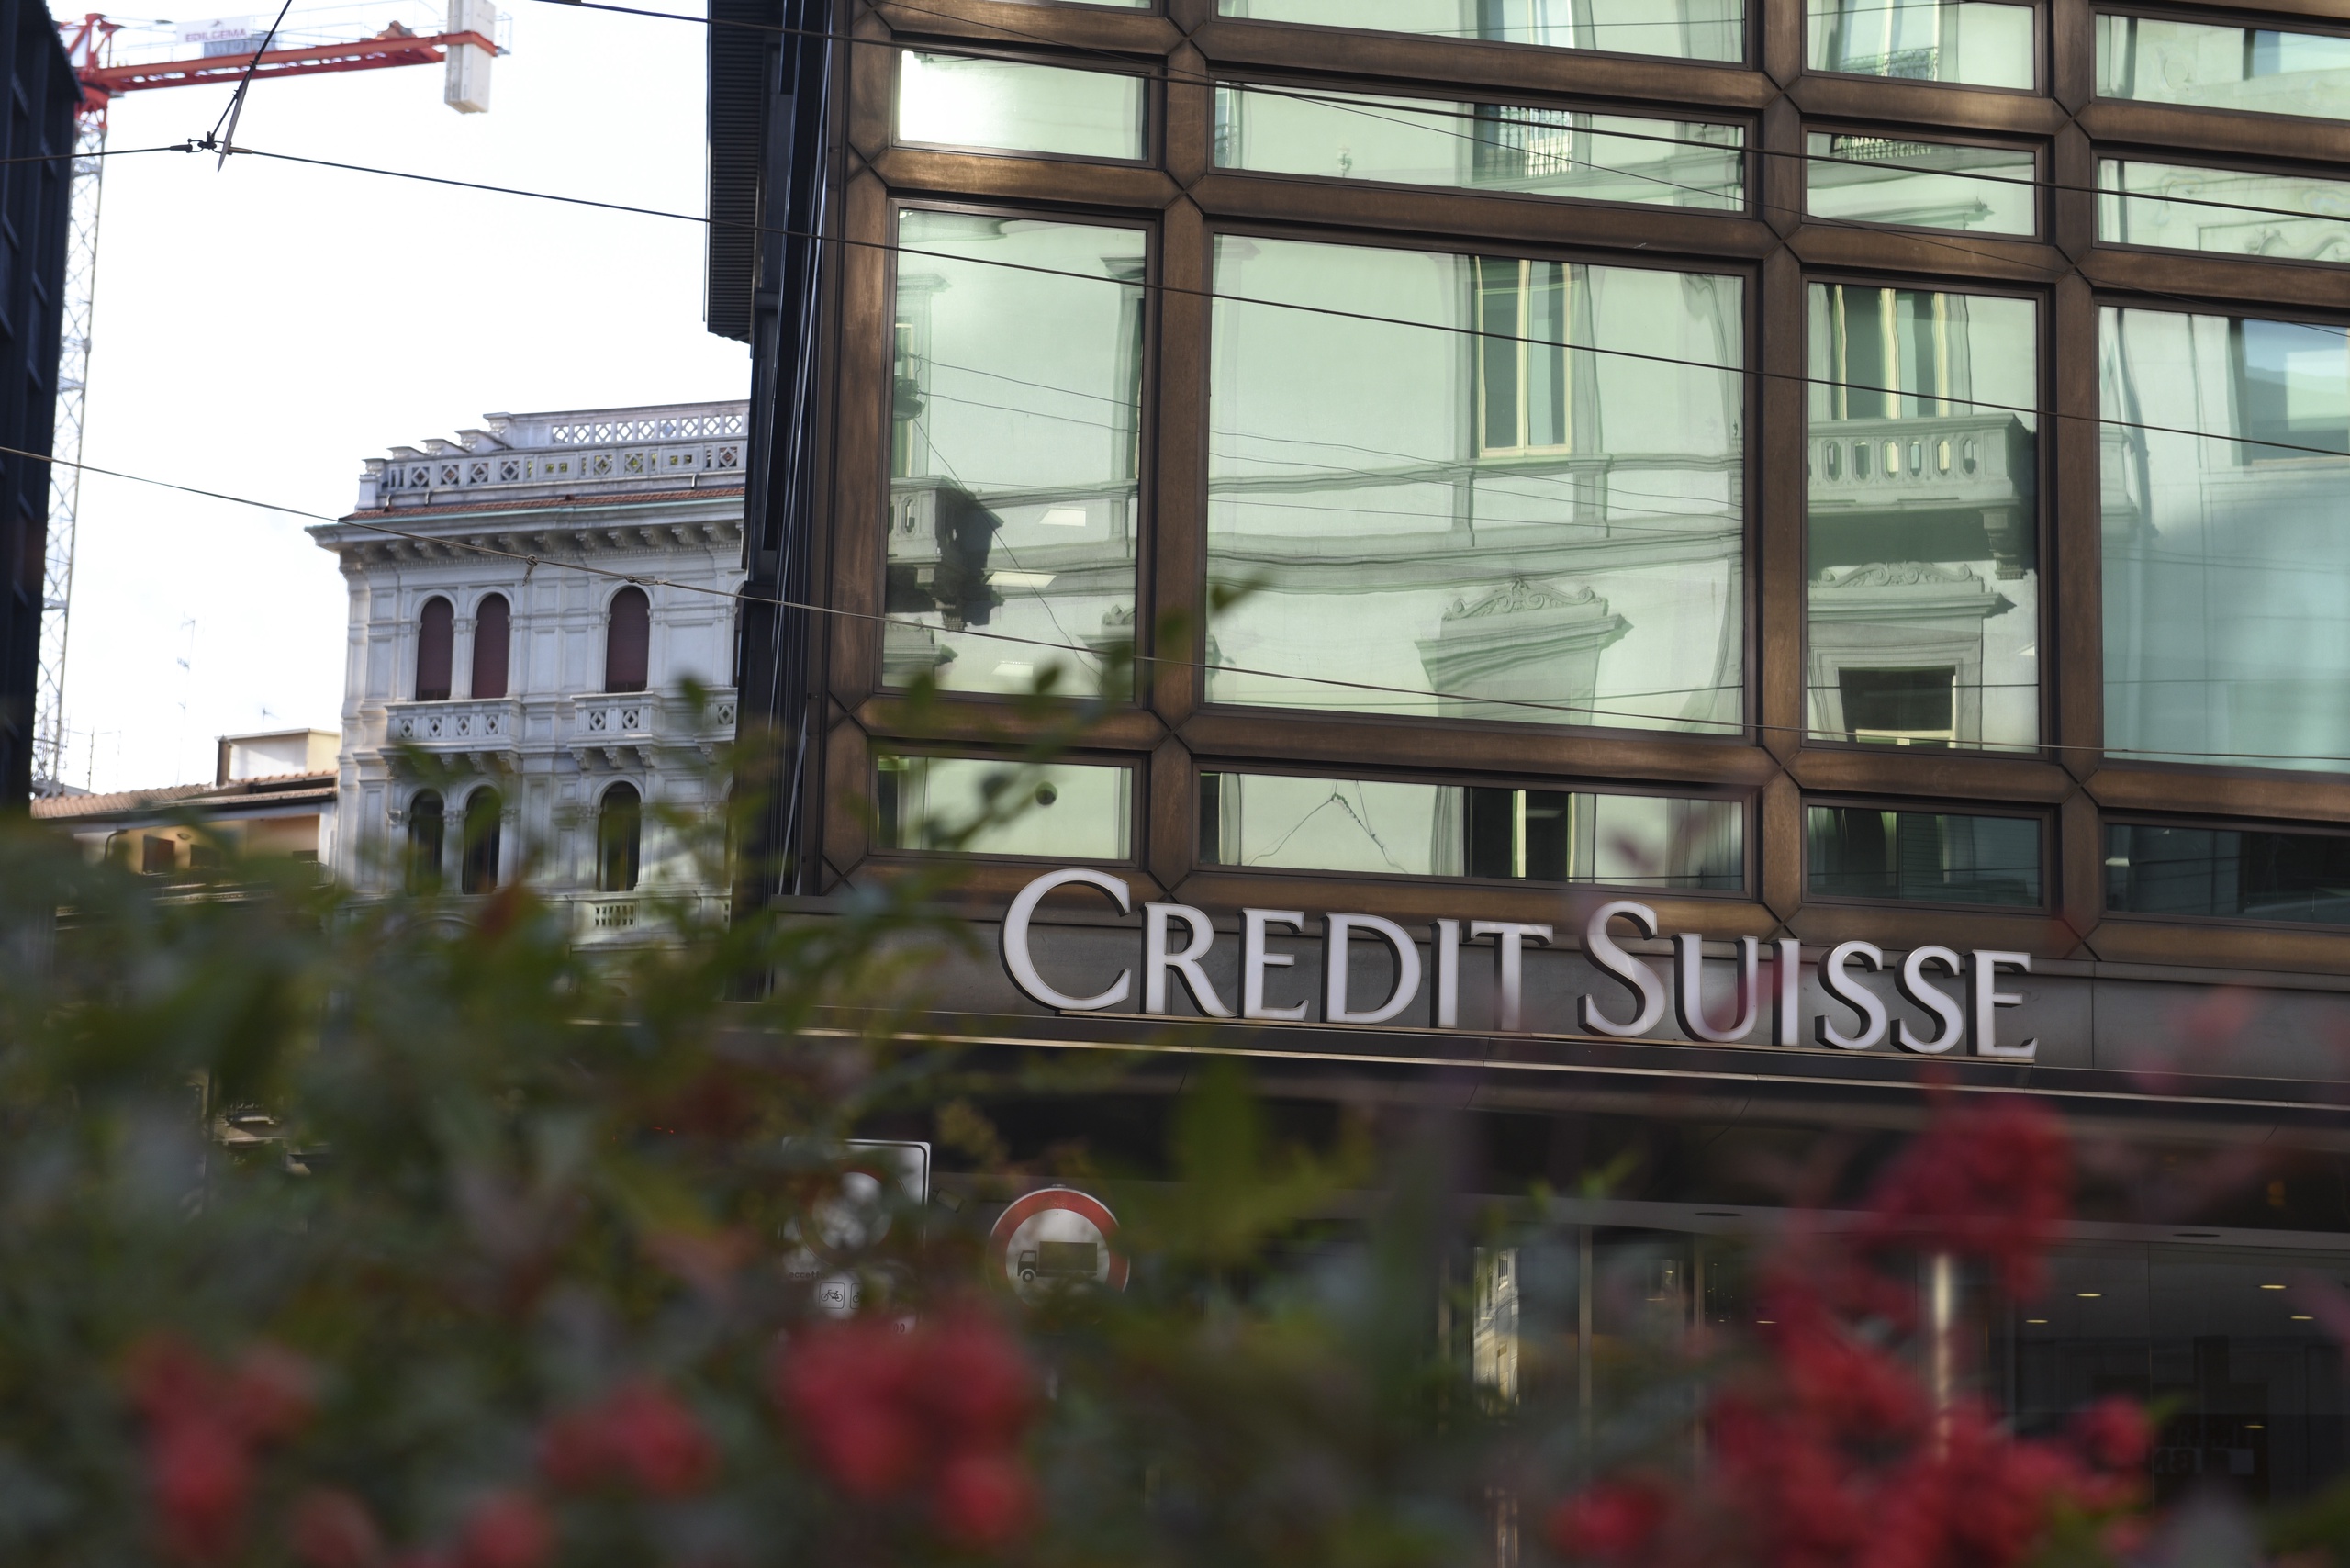 The European Central Bank has done well to announce an interest rate hike of 50 basis points, says Professor Arnoud Boot.  At first there were doubts about this because of the financial instability that the collapse of Silicon Valley Bank and the noise surrounding Credit Suisse entailed.